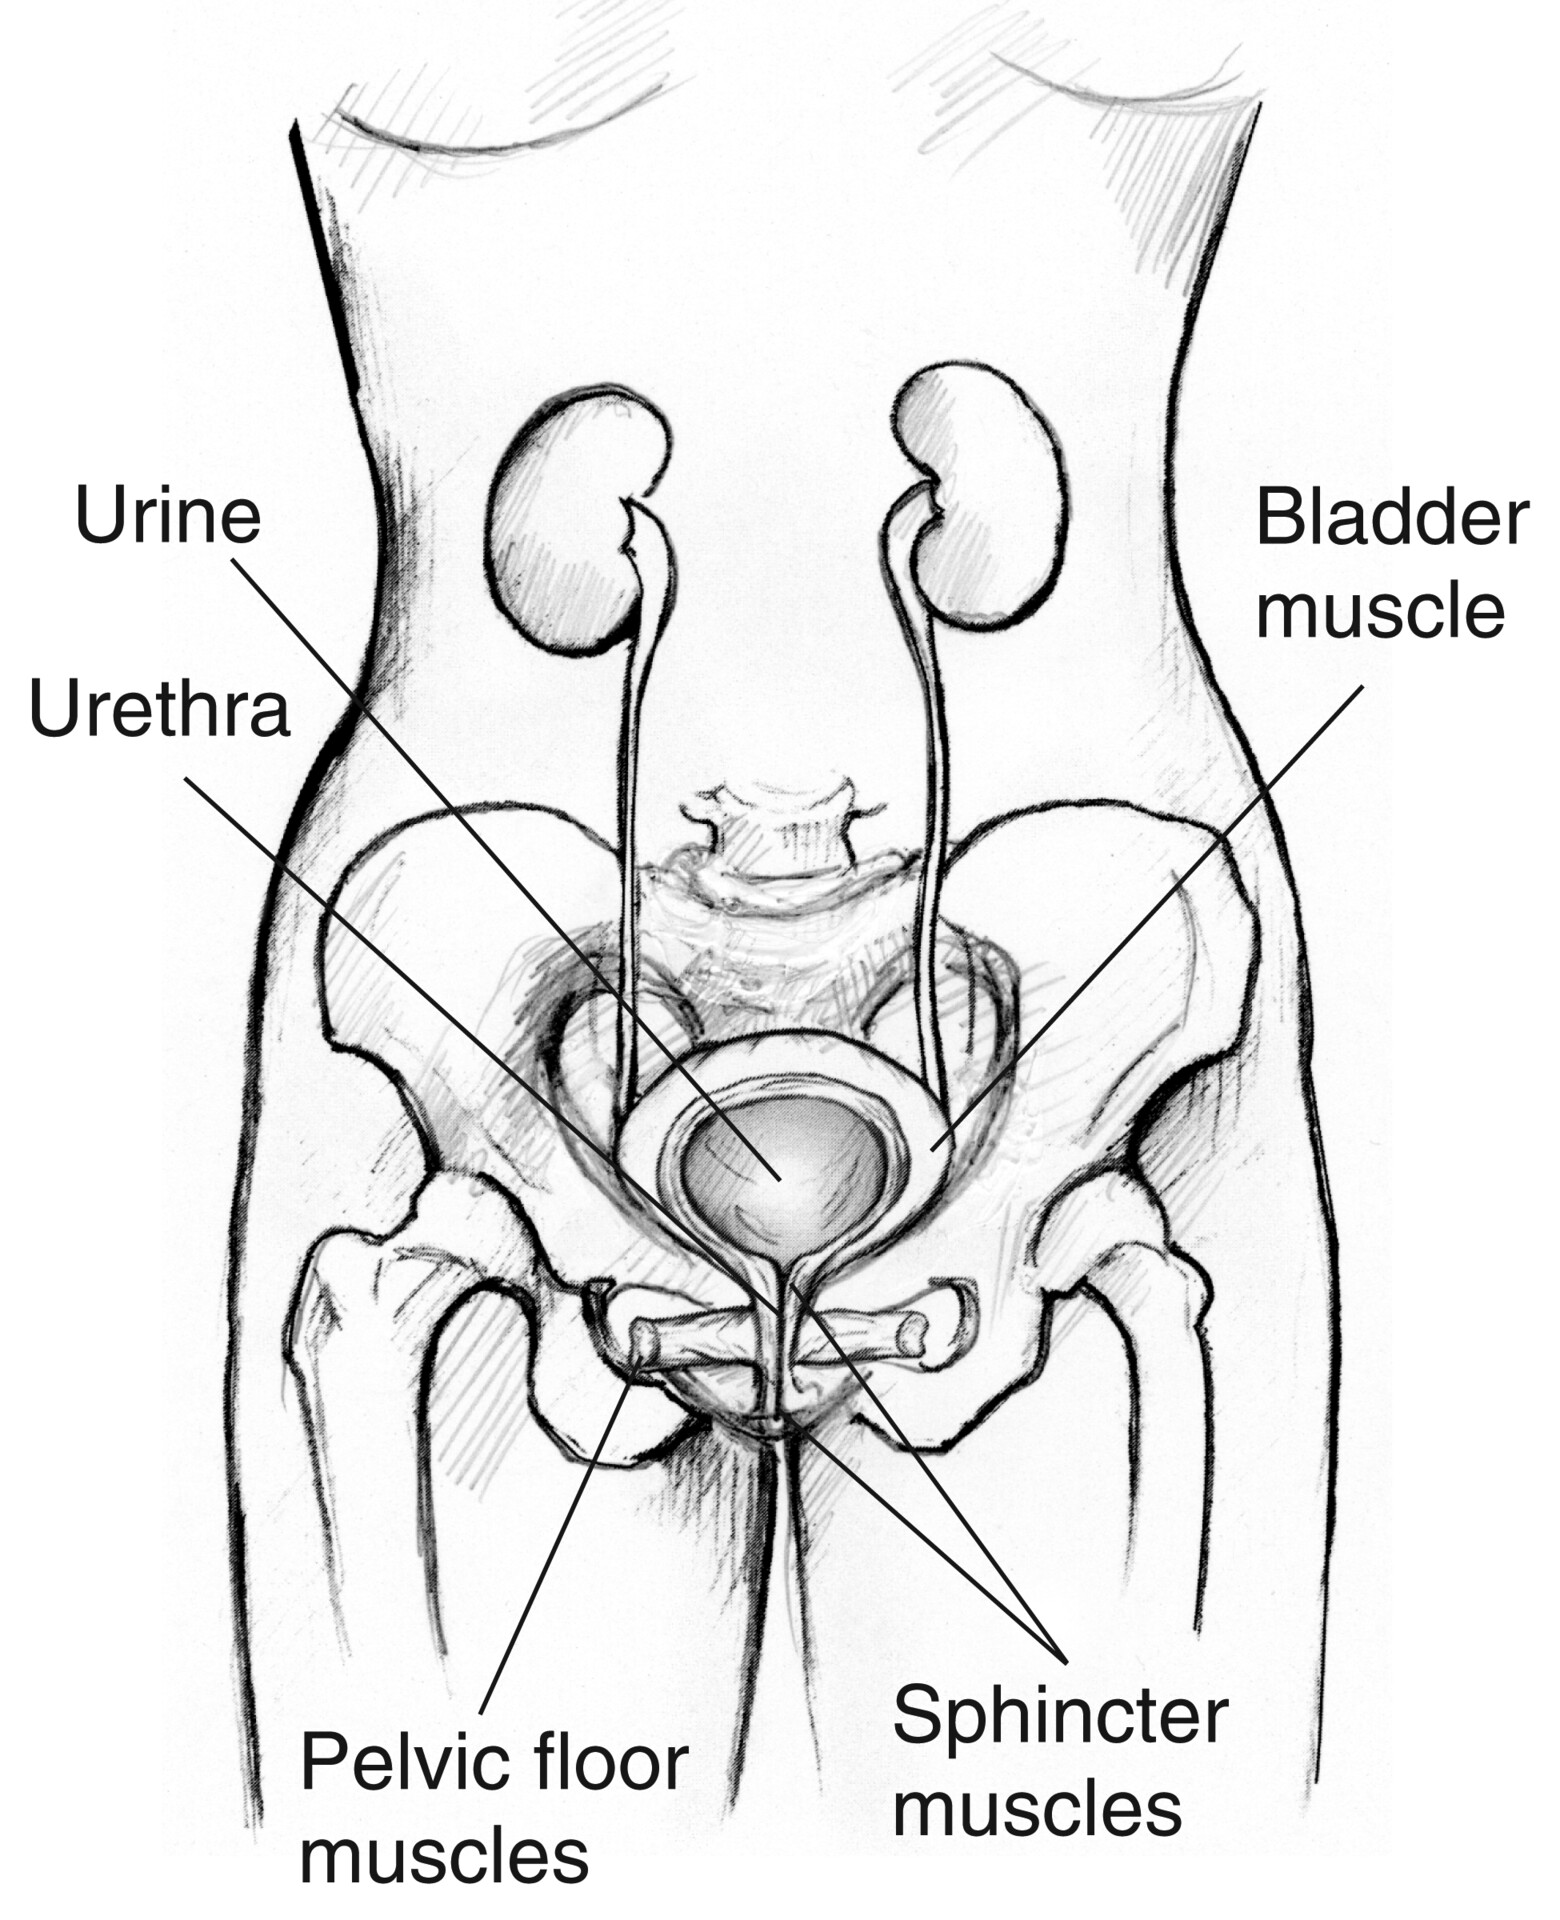 Male urinary tract, with the bladder, prostate, and urethra labeled - Media  Asset - NIDDK